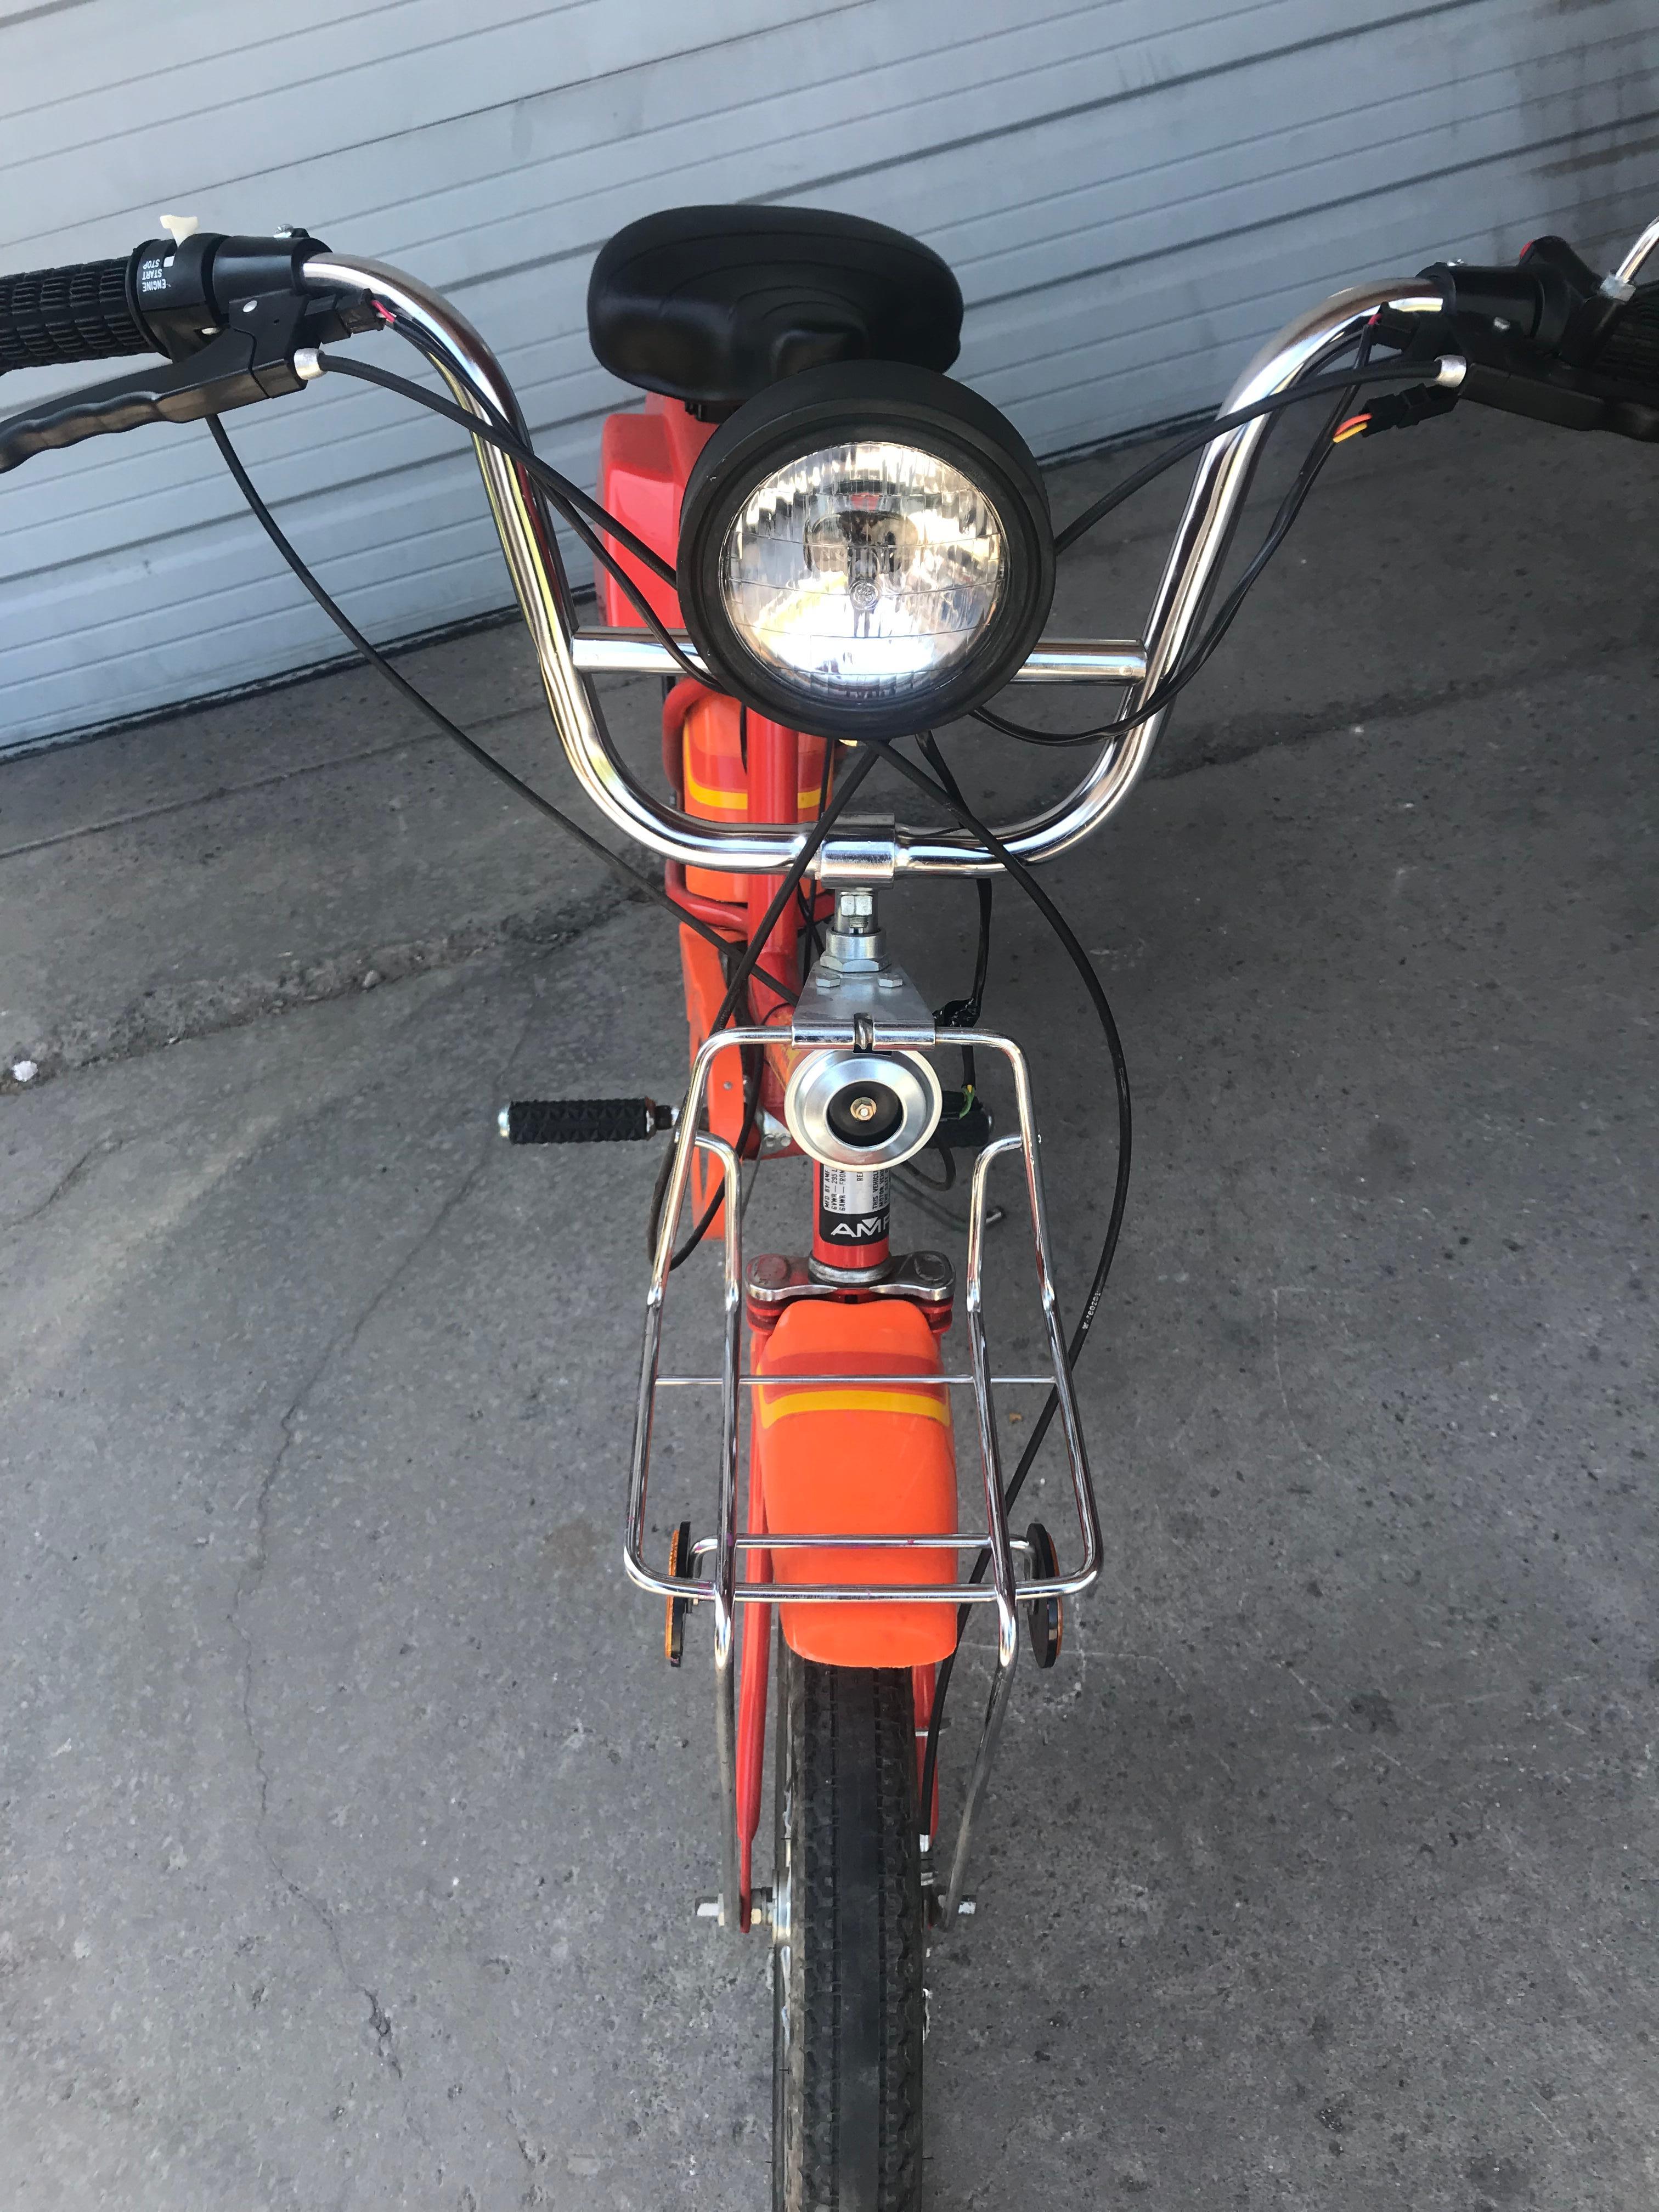 amf roadmaster moped for sale